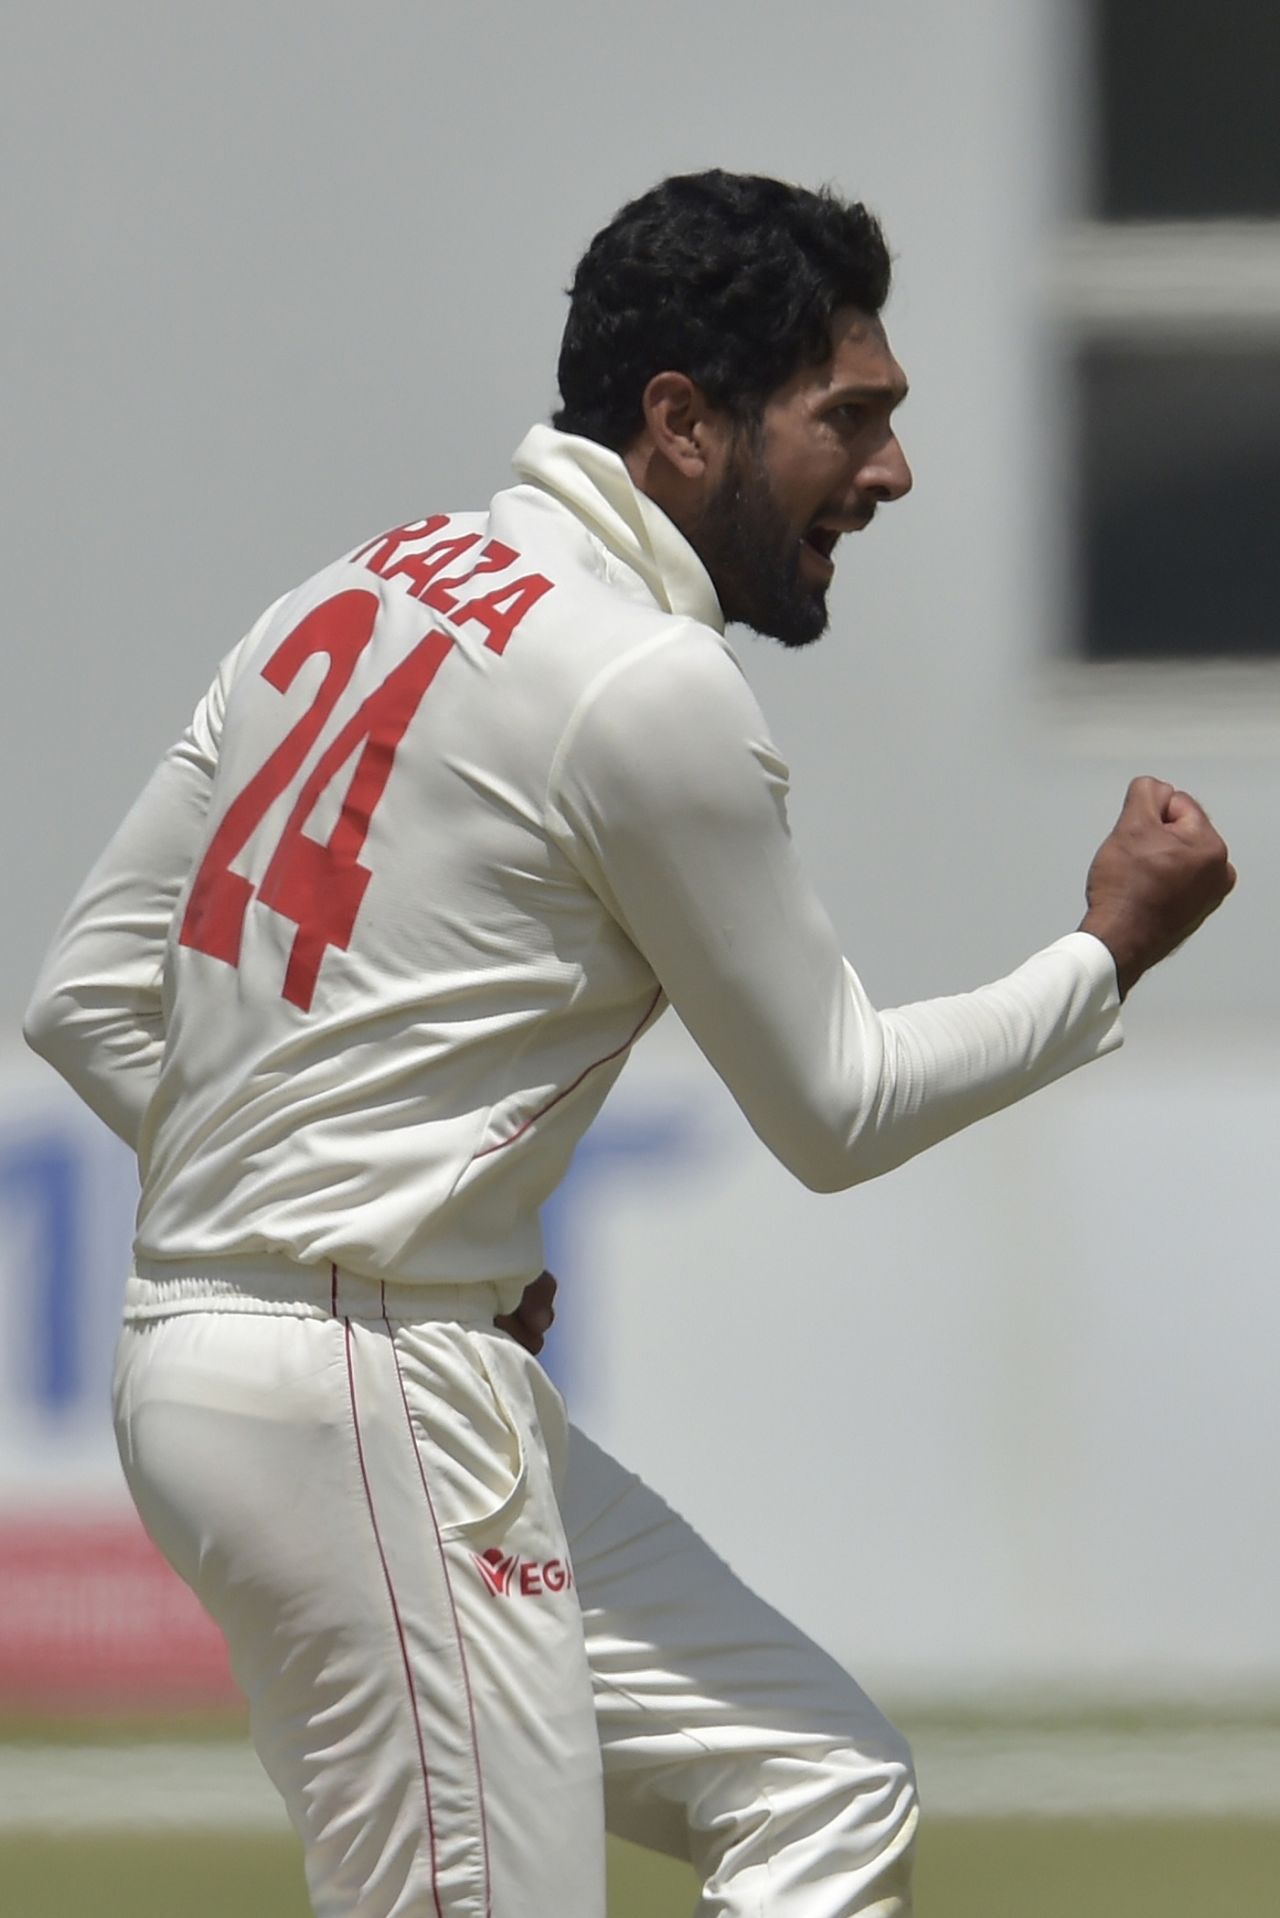 Sikandar Raza is pumped up after taking a wicket, Zimbabwe v Sri Lanka, 2nd Test, Harare, 3rd day, January 29, 2020